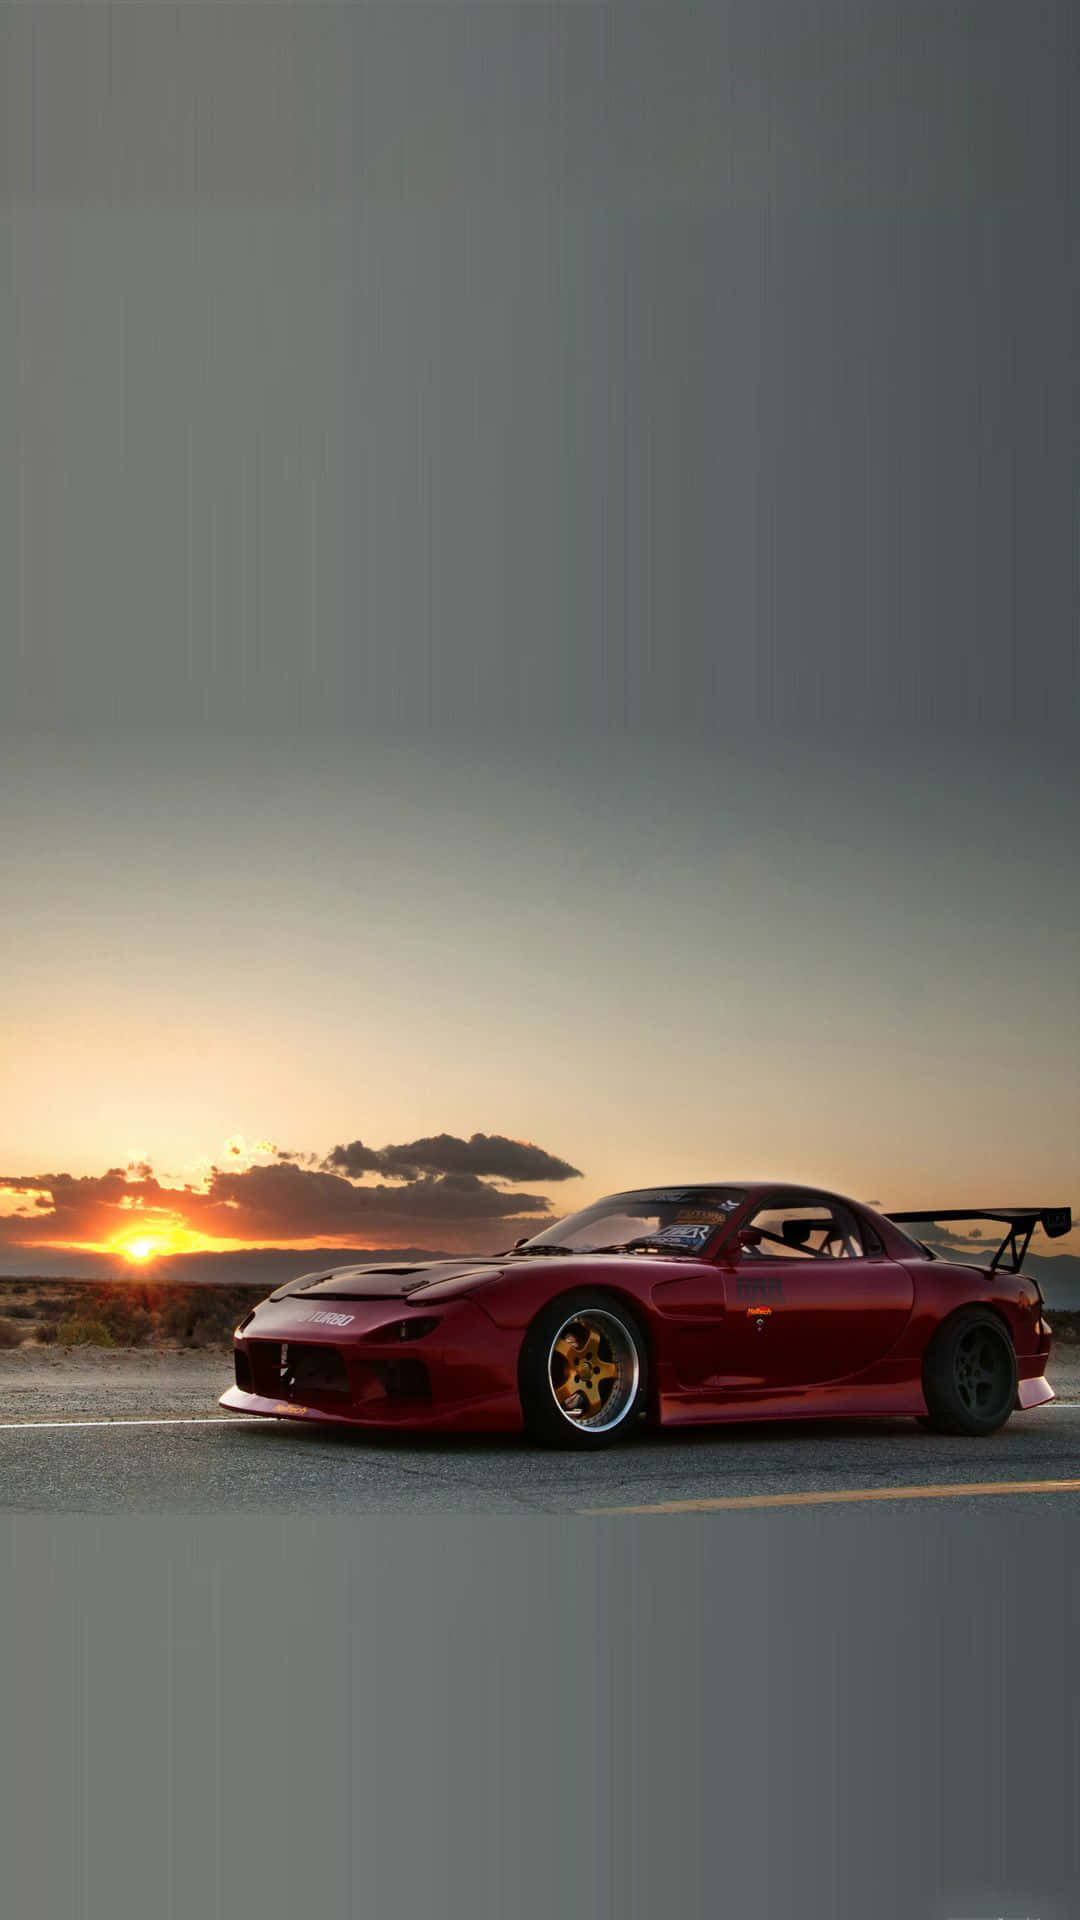 Majestic Red Mazda Rx 7 at Sunset Wallpaper